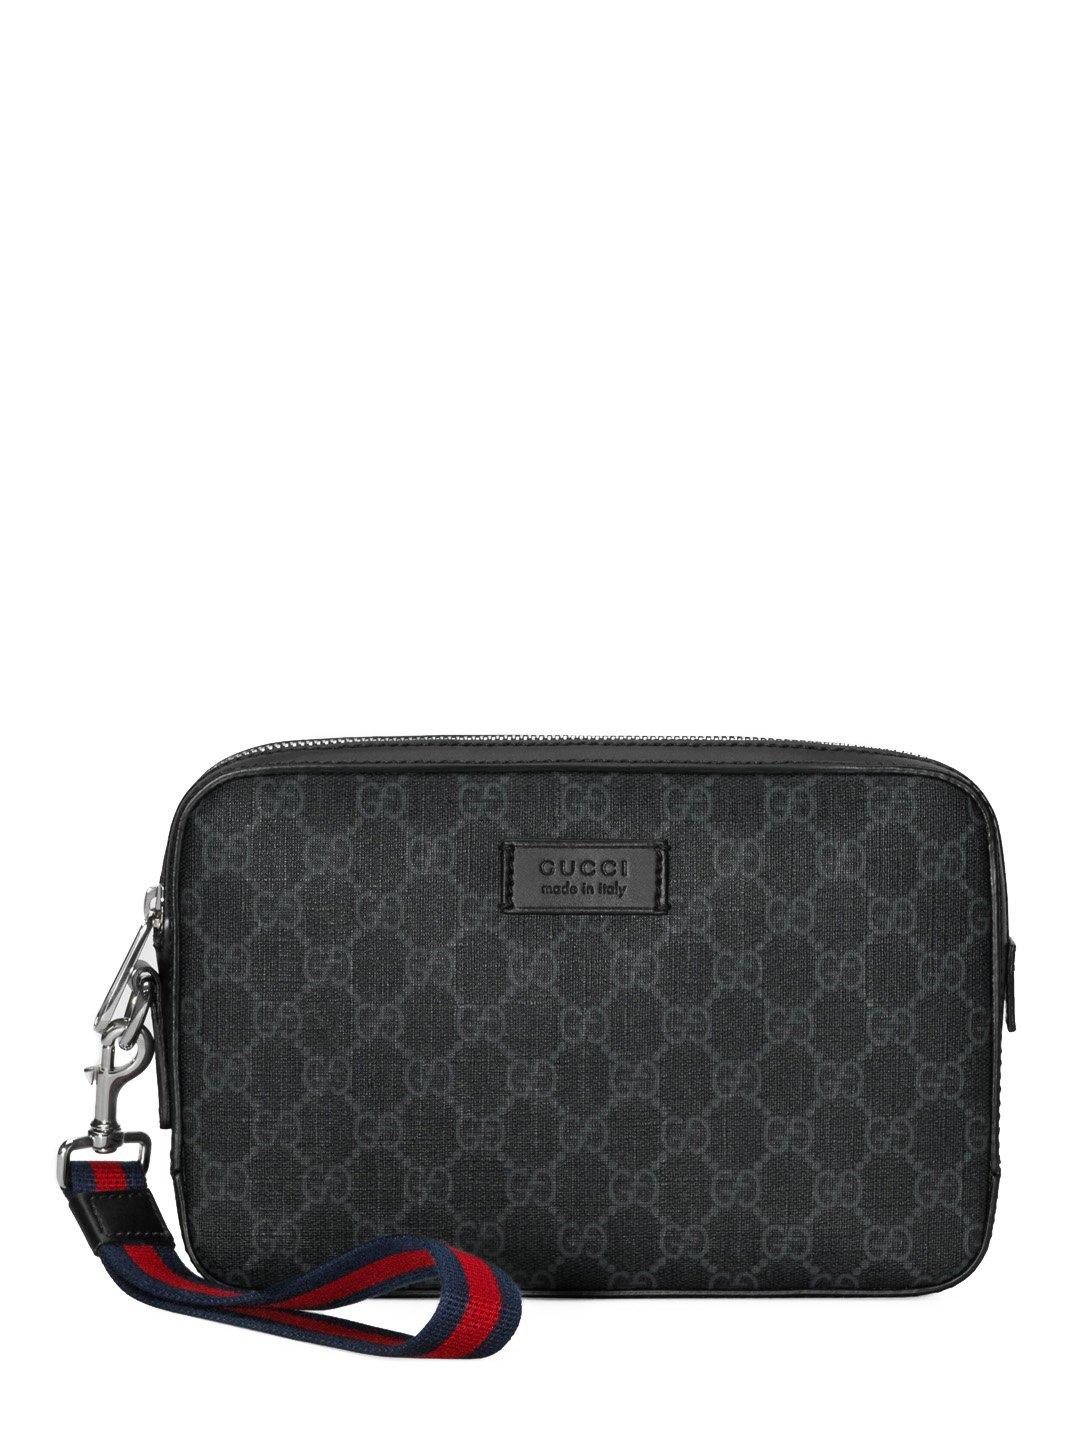 Gucci Canvas GG Supreme Toiletry Bag in Black for Men - Lyst